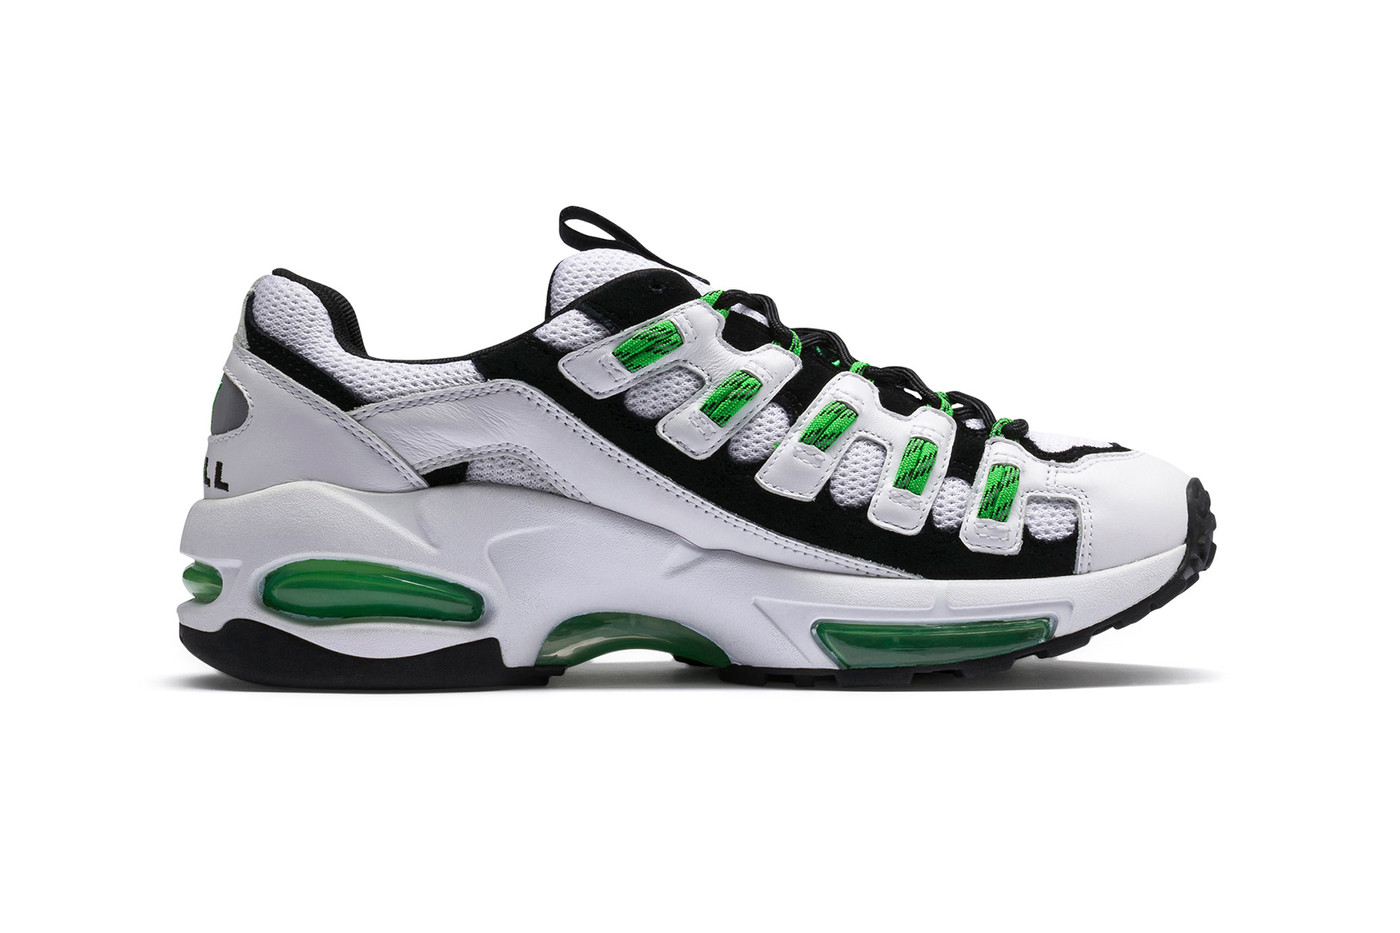 The PUMA CELL Endura Is the Latest '90s 